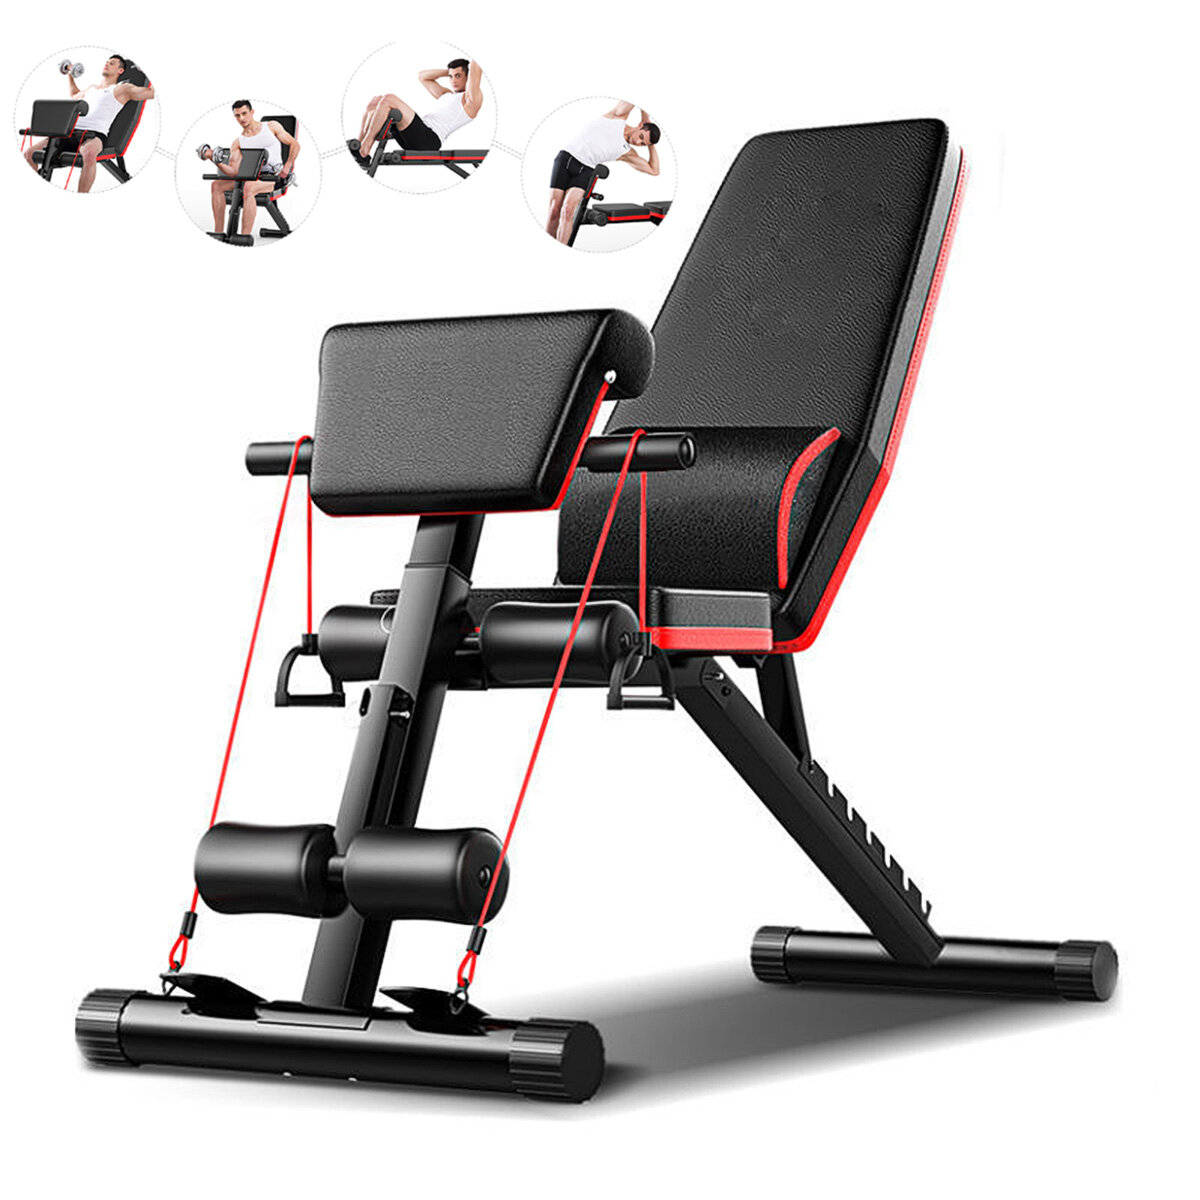 best price,in,foldable,exercise,bench,eu,discount